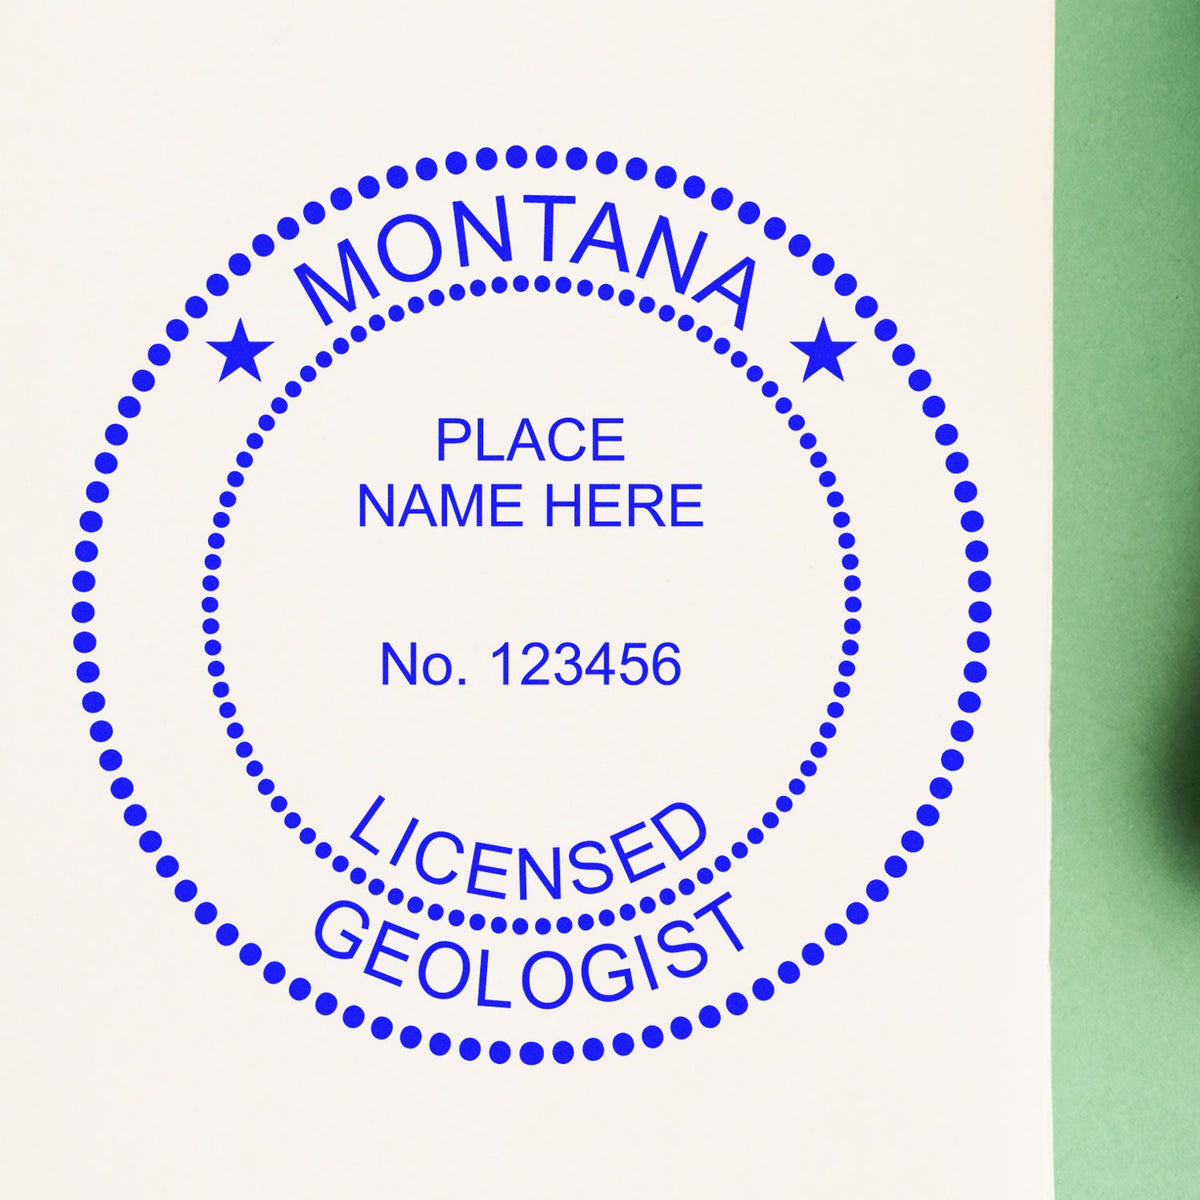 An alternative view of the Digital Montana Geologist Stamp, Electronic Seal for Montana Geologist stamped on a sheet of paper showing the image in use